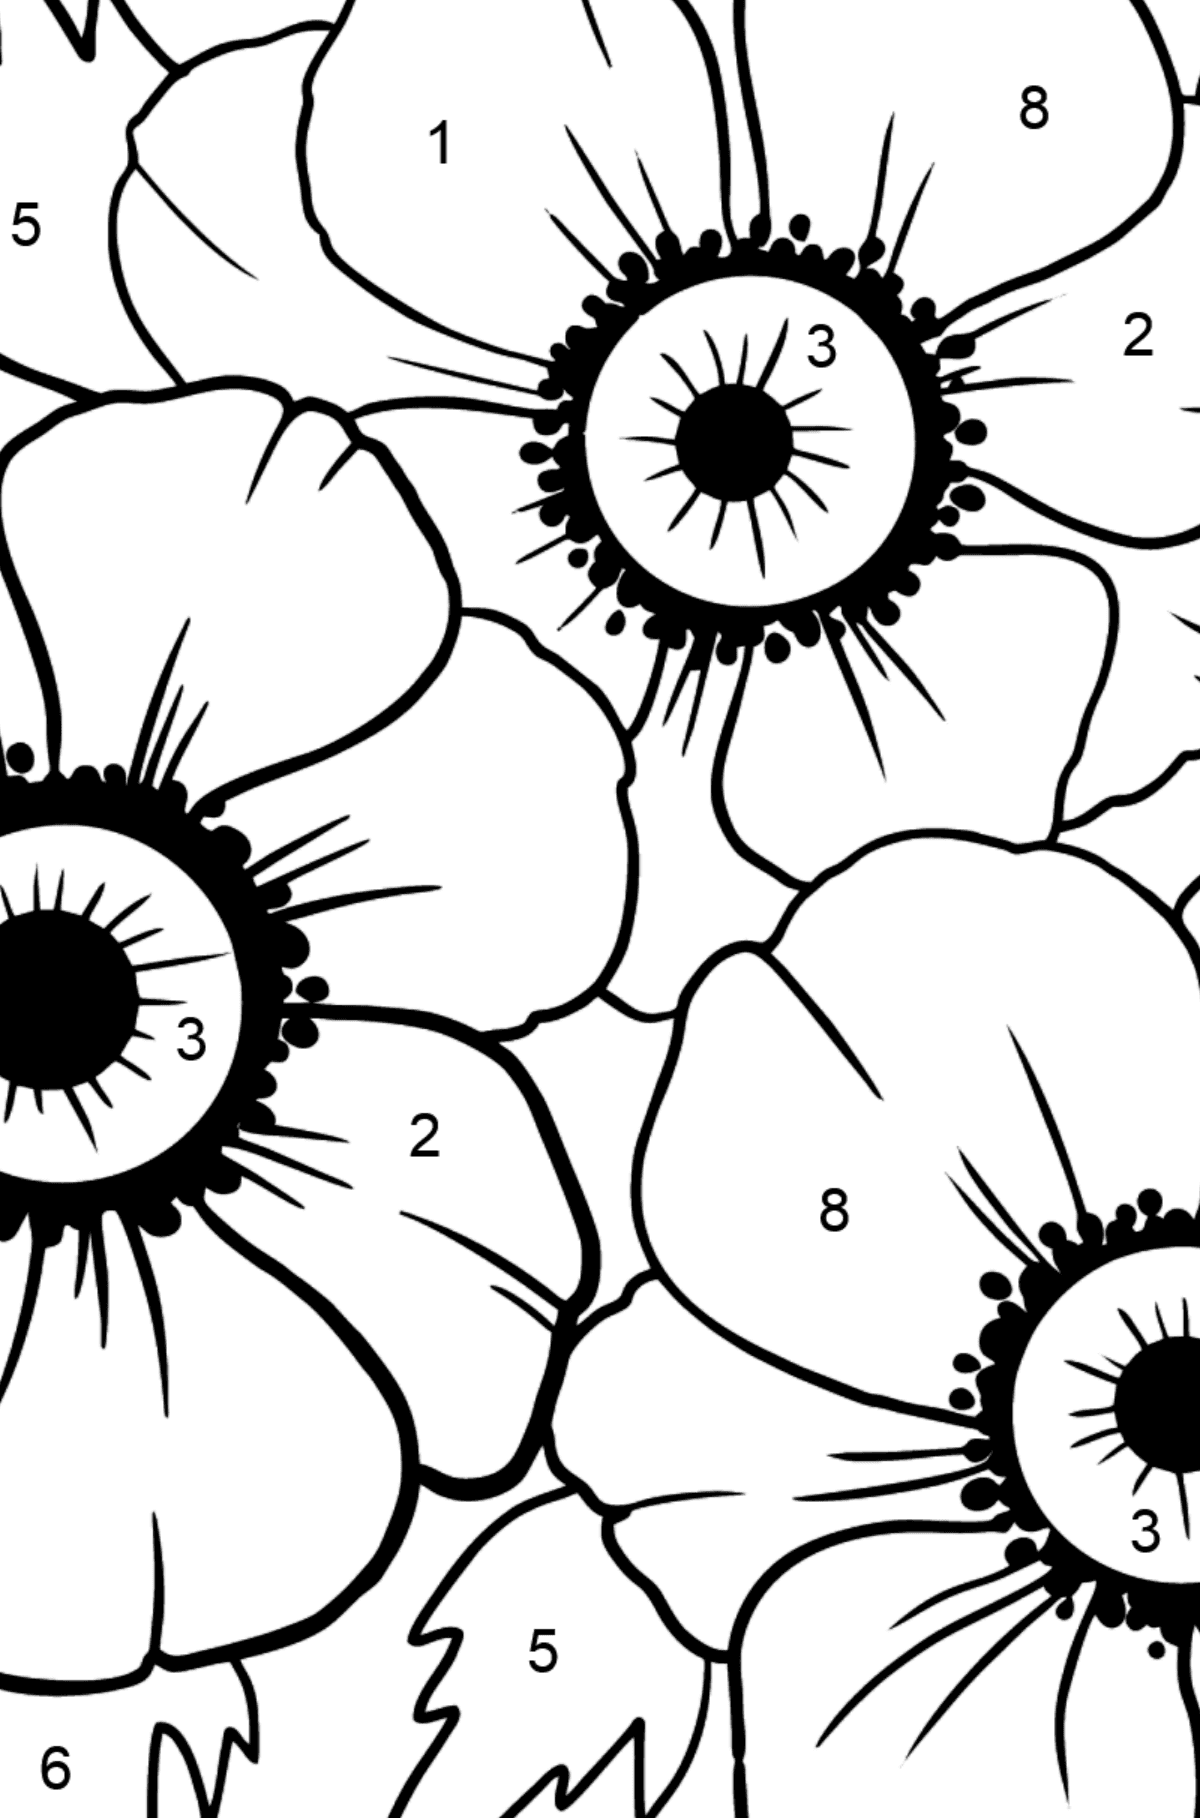 Coloring Page Anemone Mr. Fokker - Coloring by Numbers for Kids